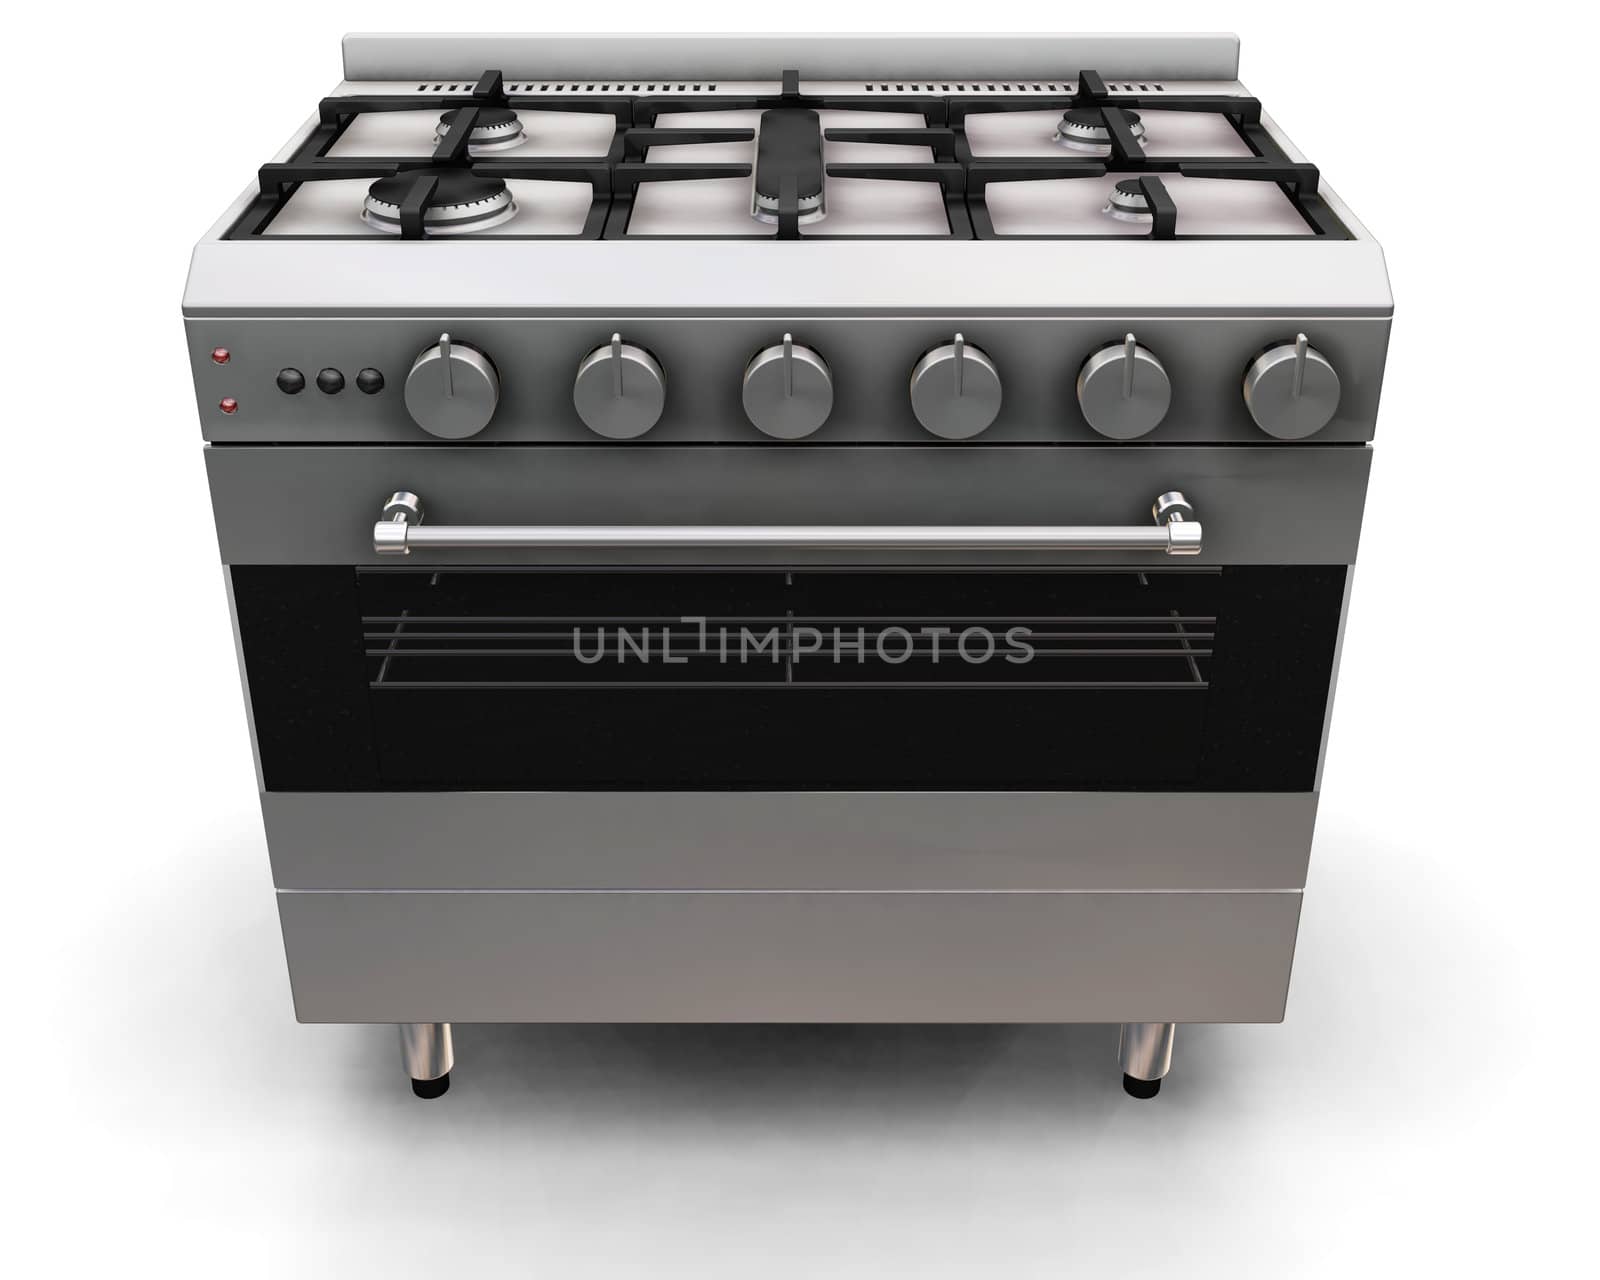 3D render of an oven on a white background